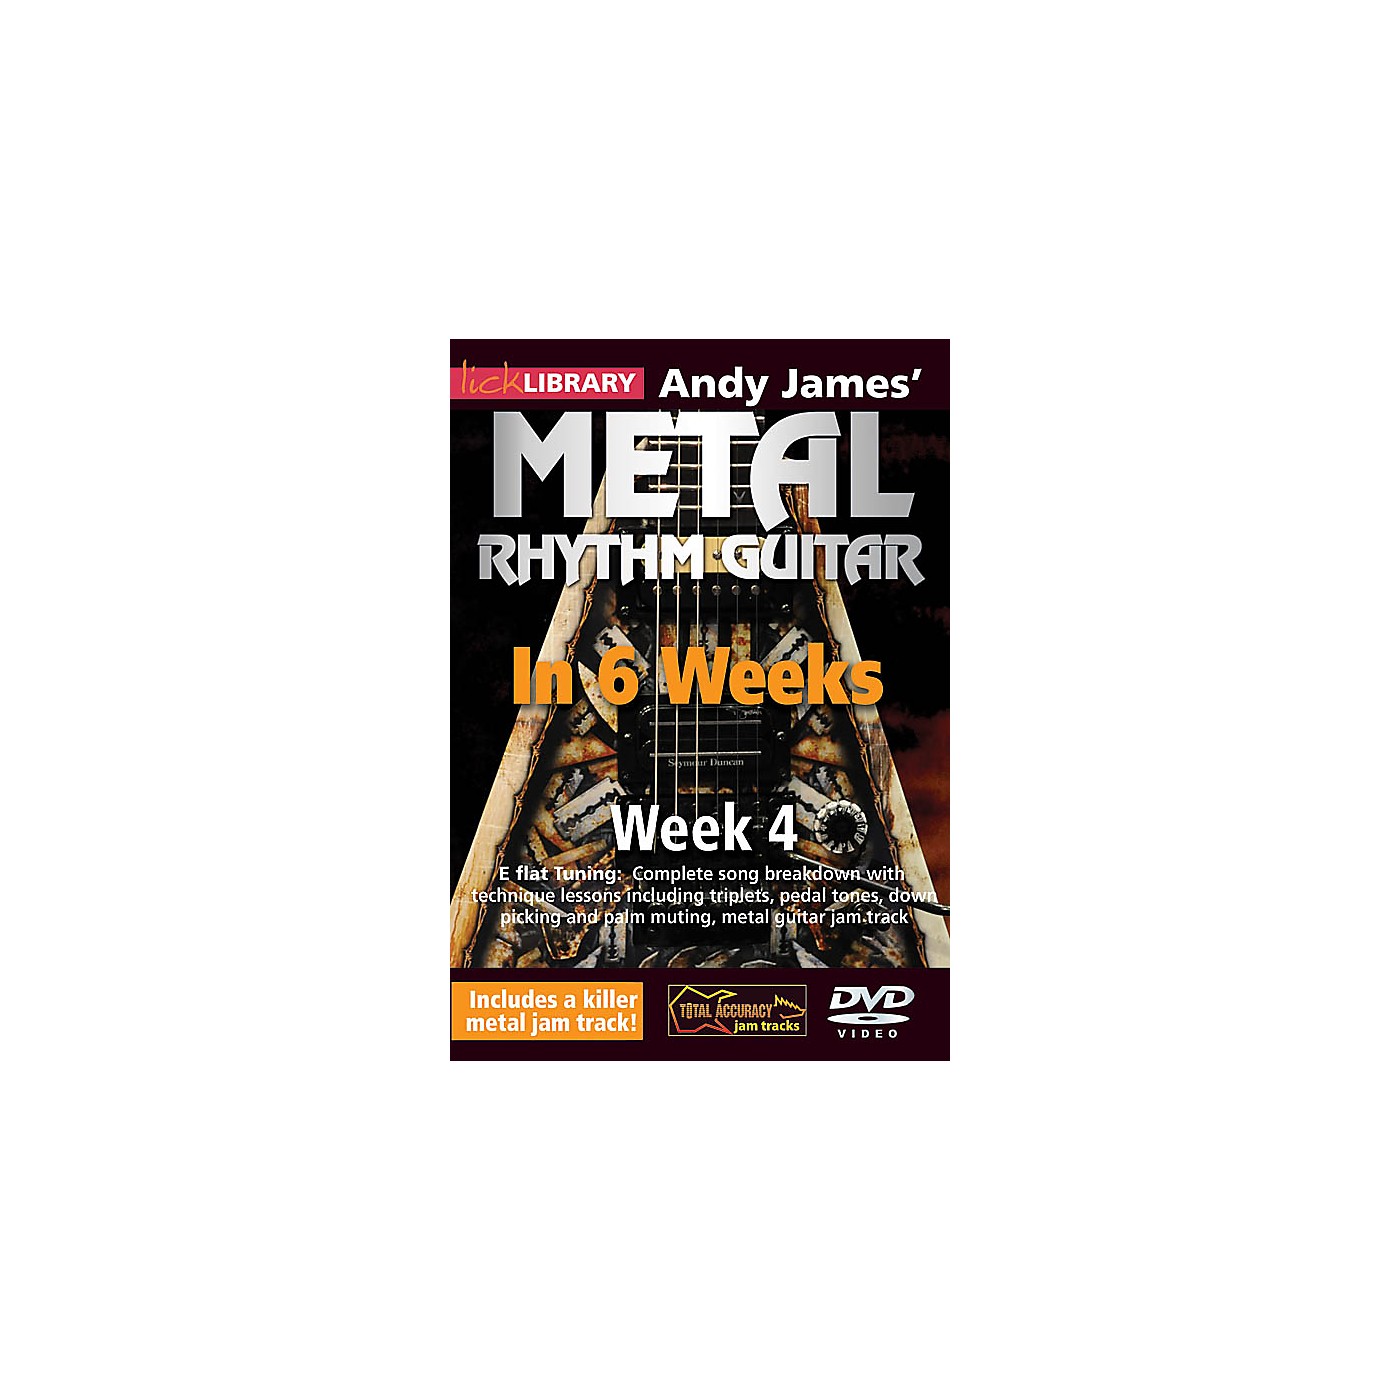 Licklibrary Andy James' Metal Rhythm Guitar in 6 Weeks (Week 4) Lick Library Series DVD Performed by Andy James thumbnail